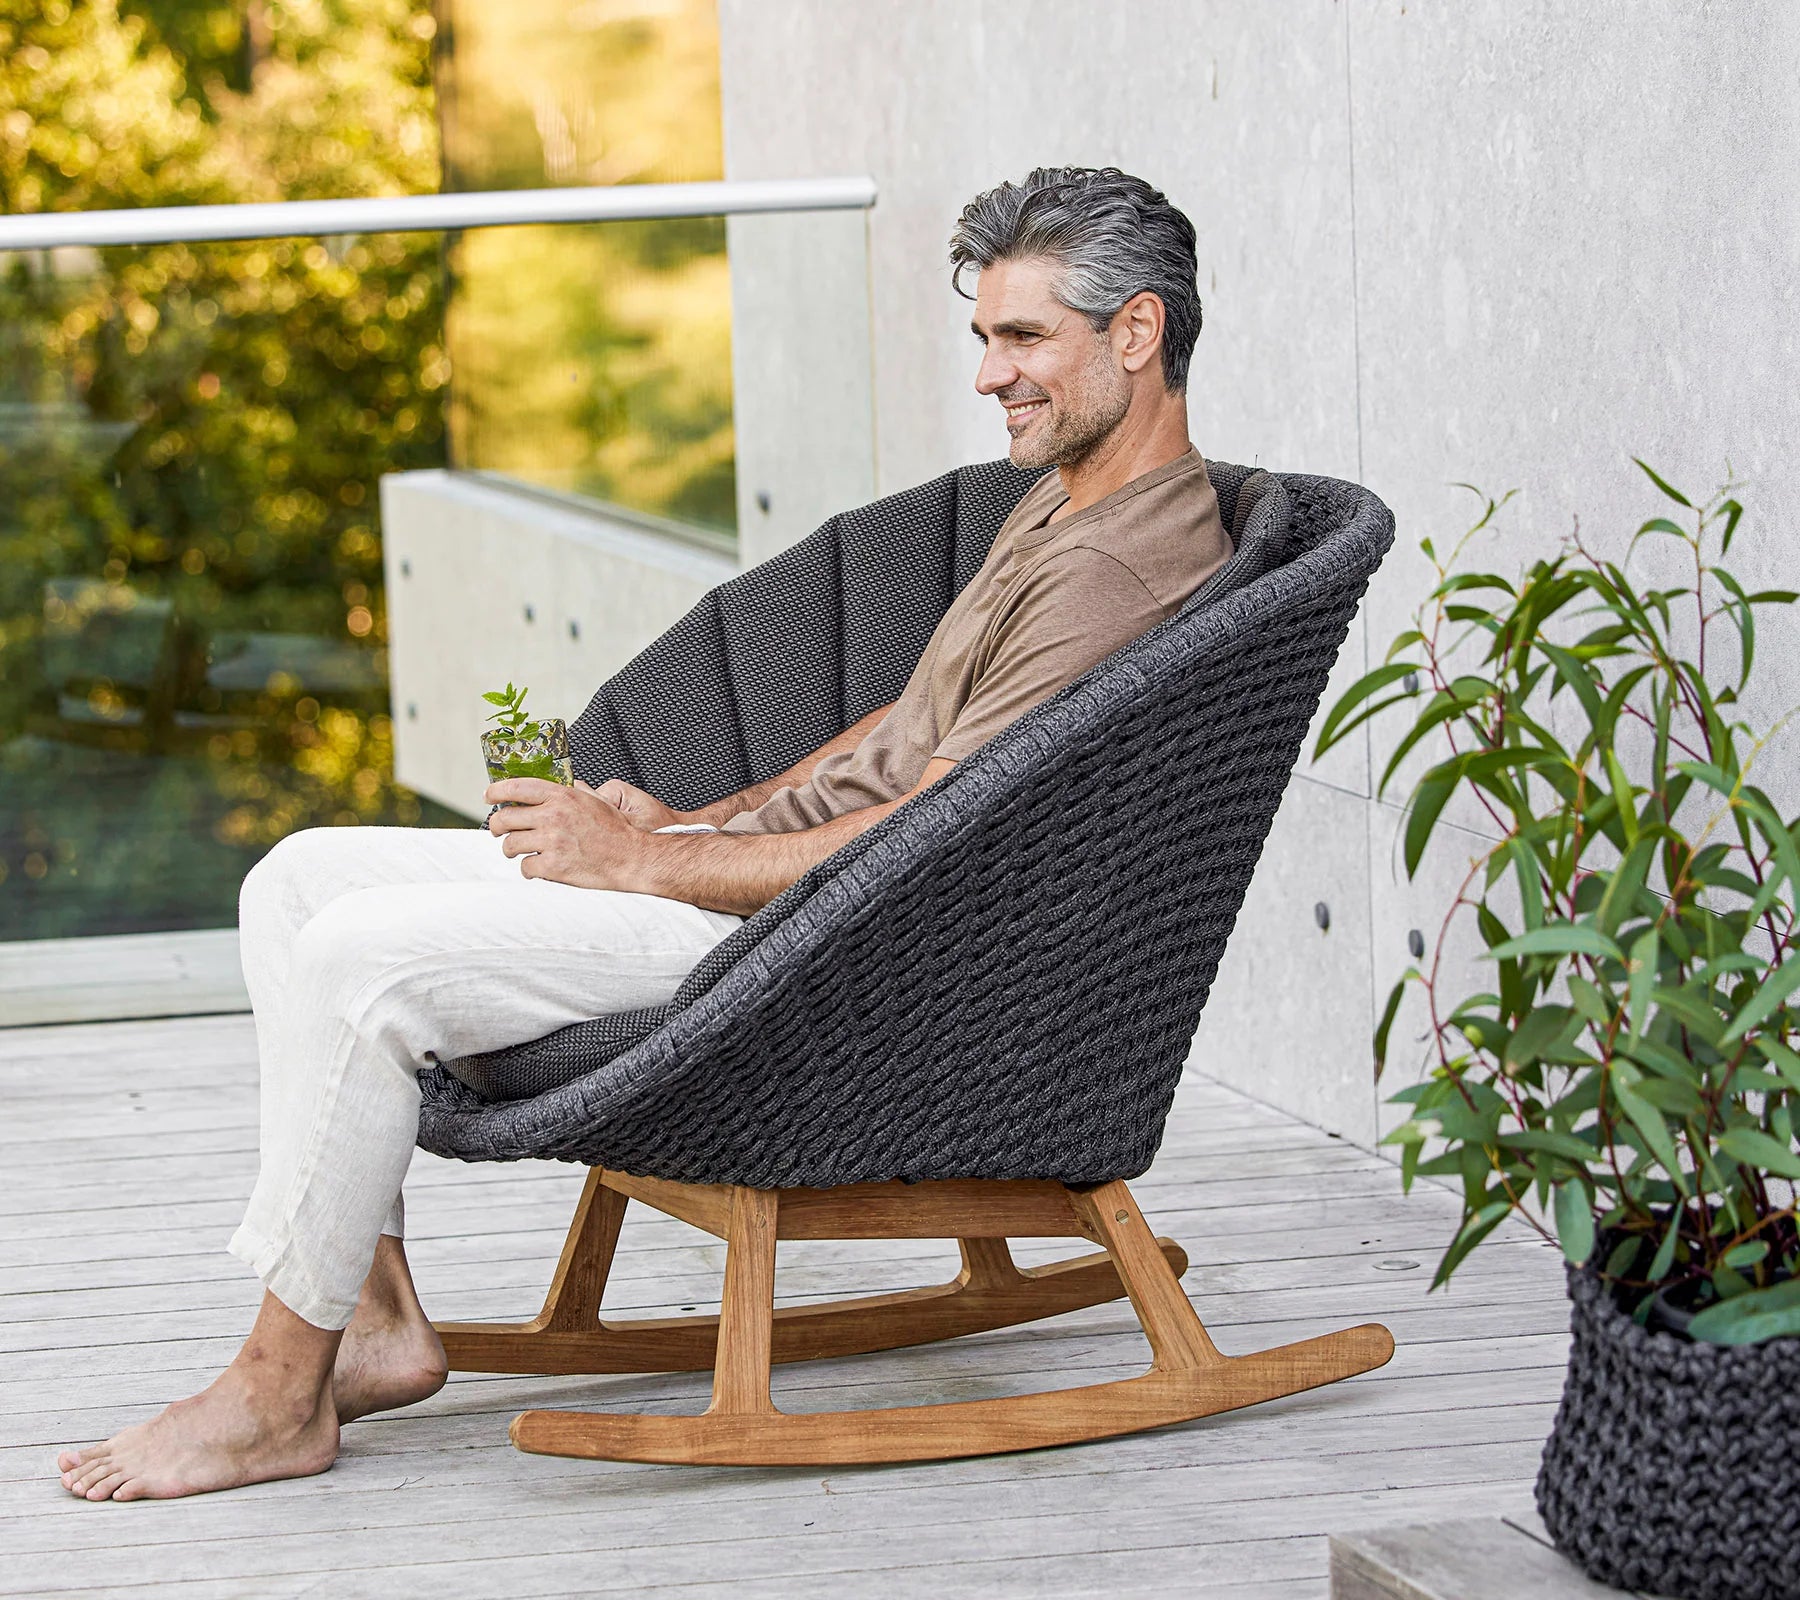  Boxhill's Peacock dark grey outdoor rocking chair with teak base with a man sitting on it holding a glass of water